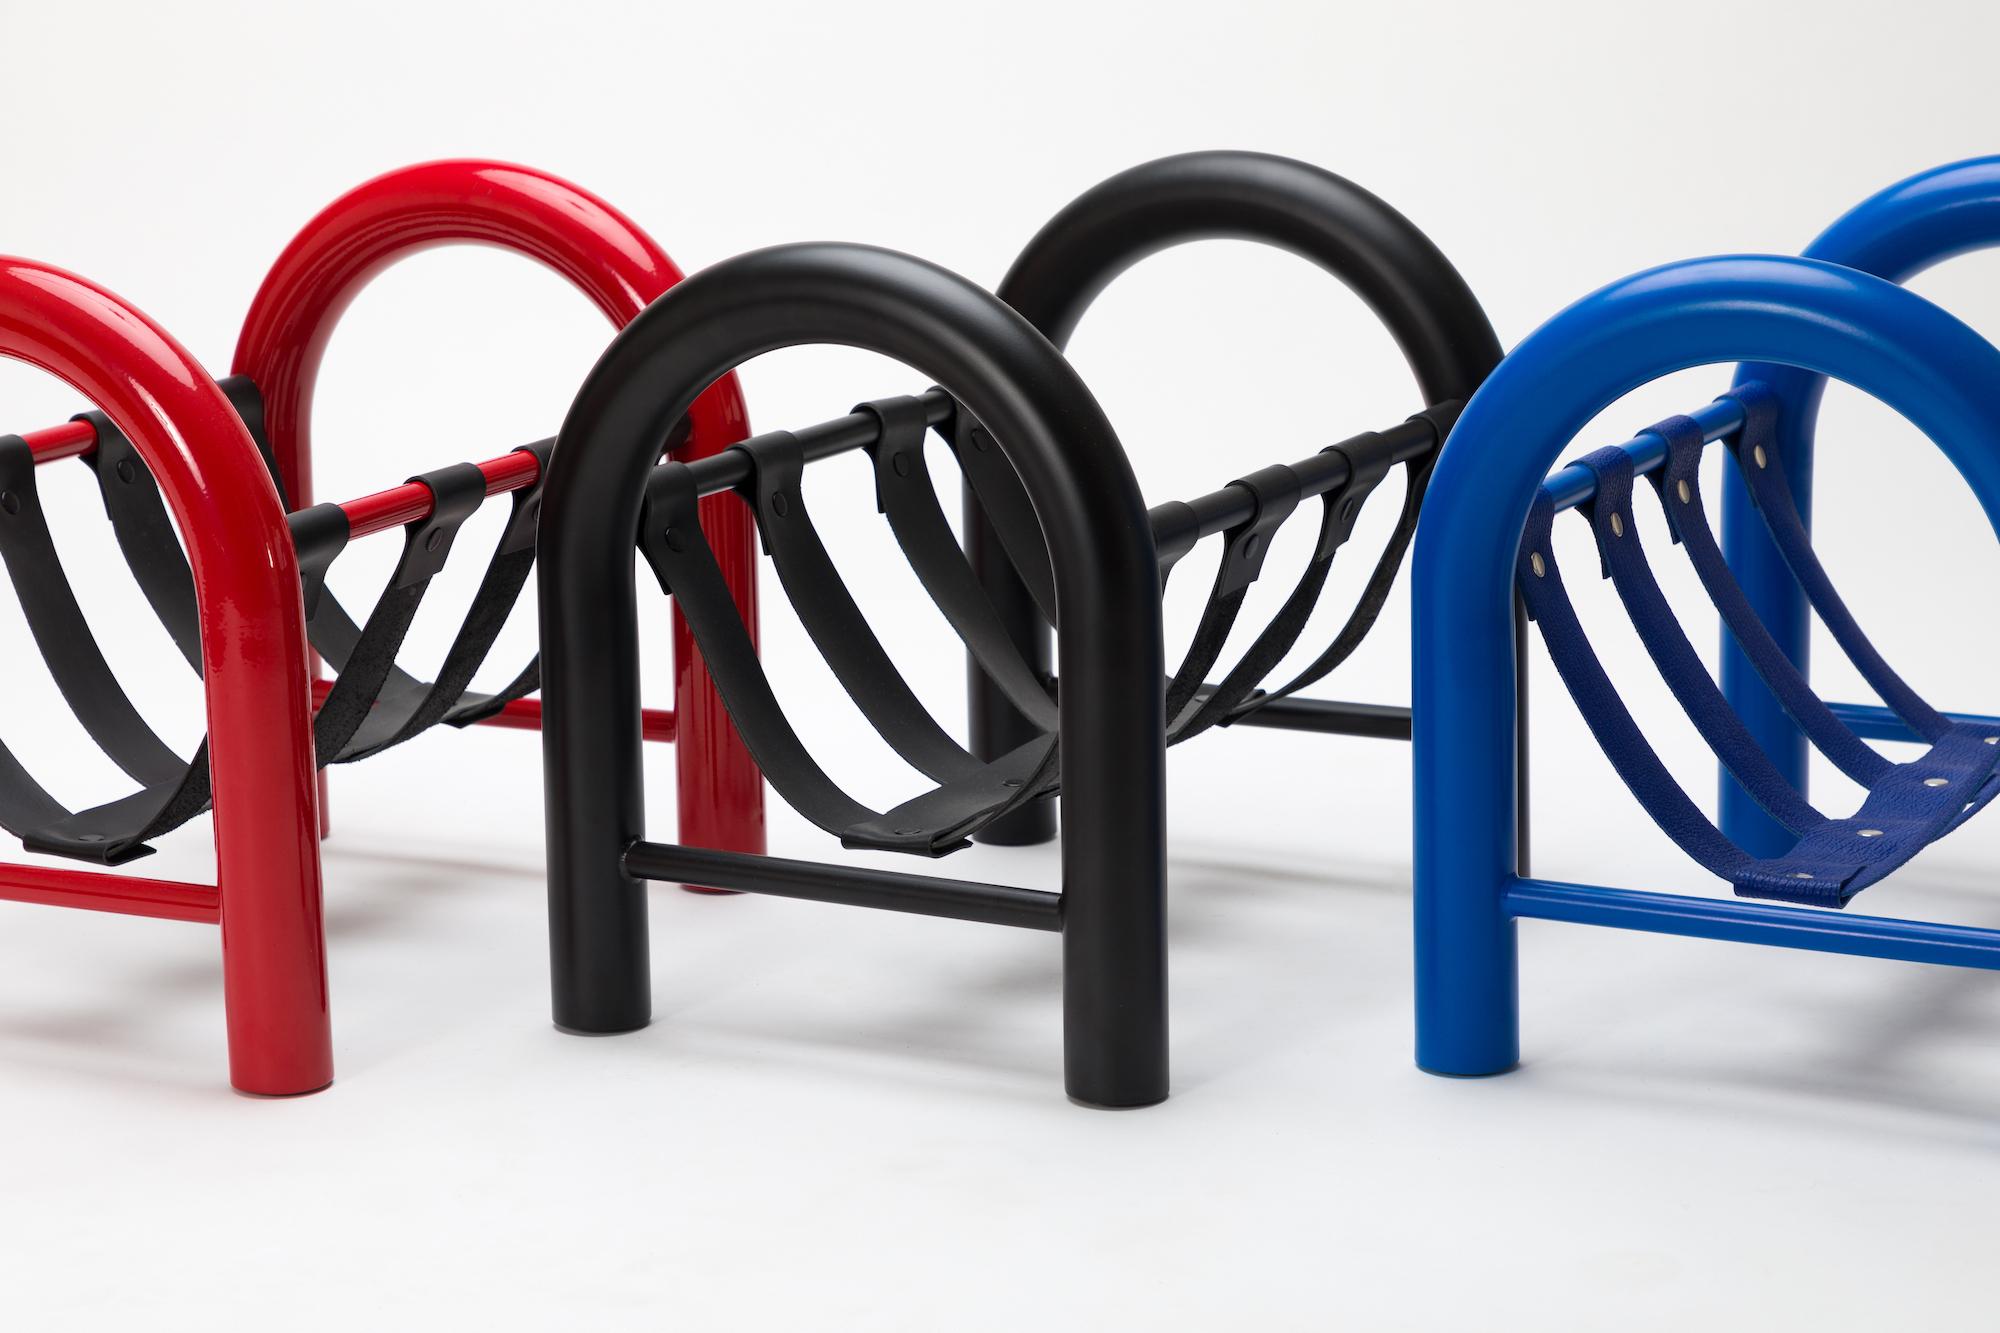 Post-Modern Limited Edition Tubular Magazine Rack by Another Human, Red and Black